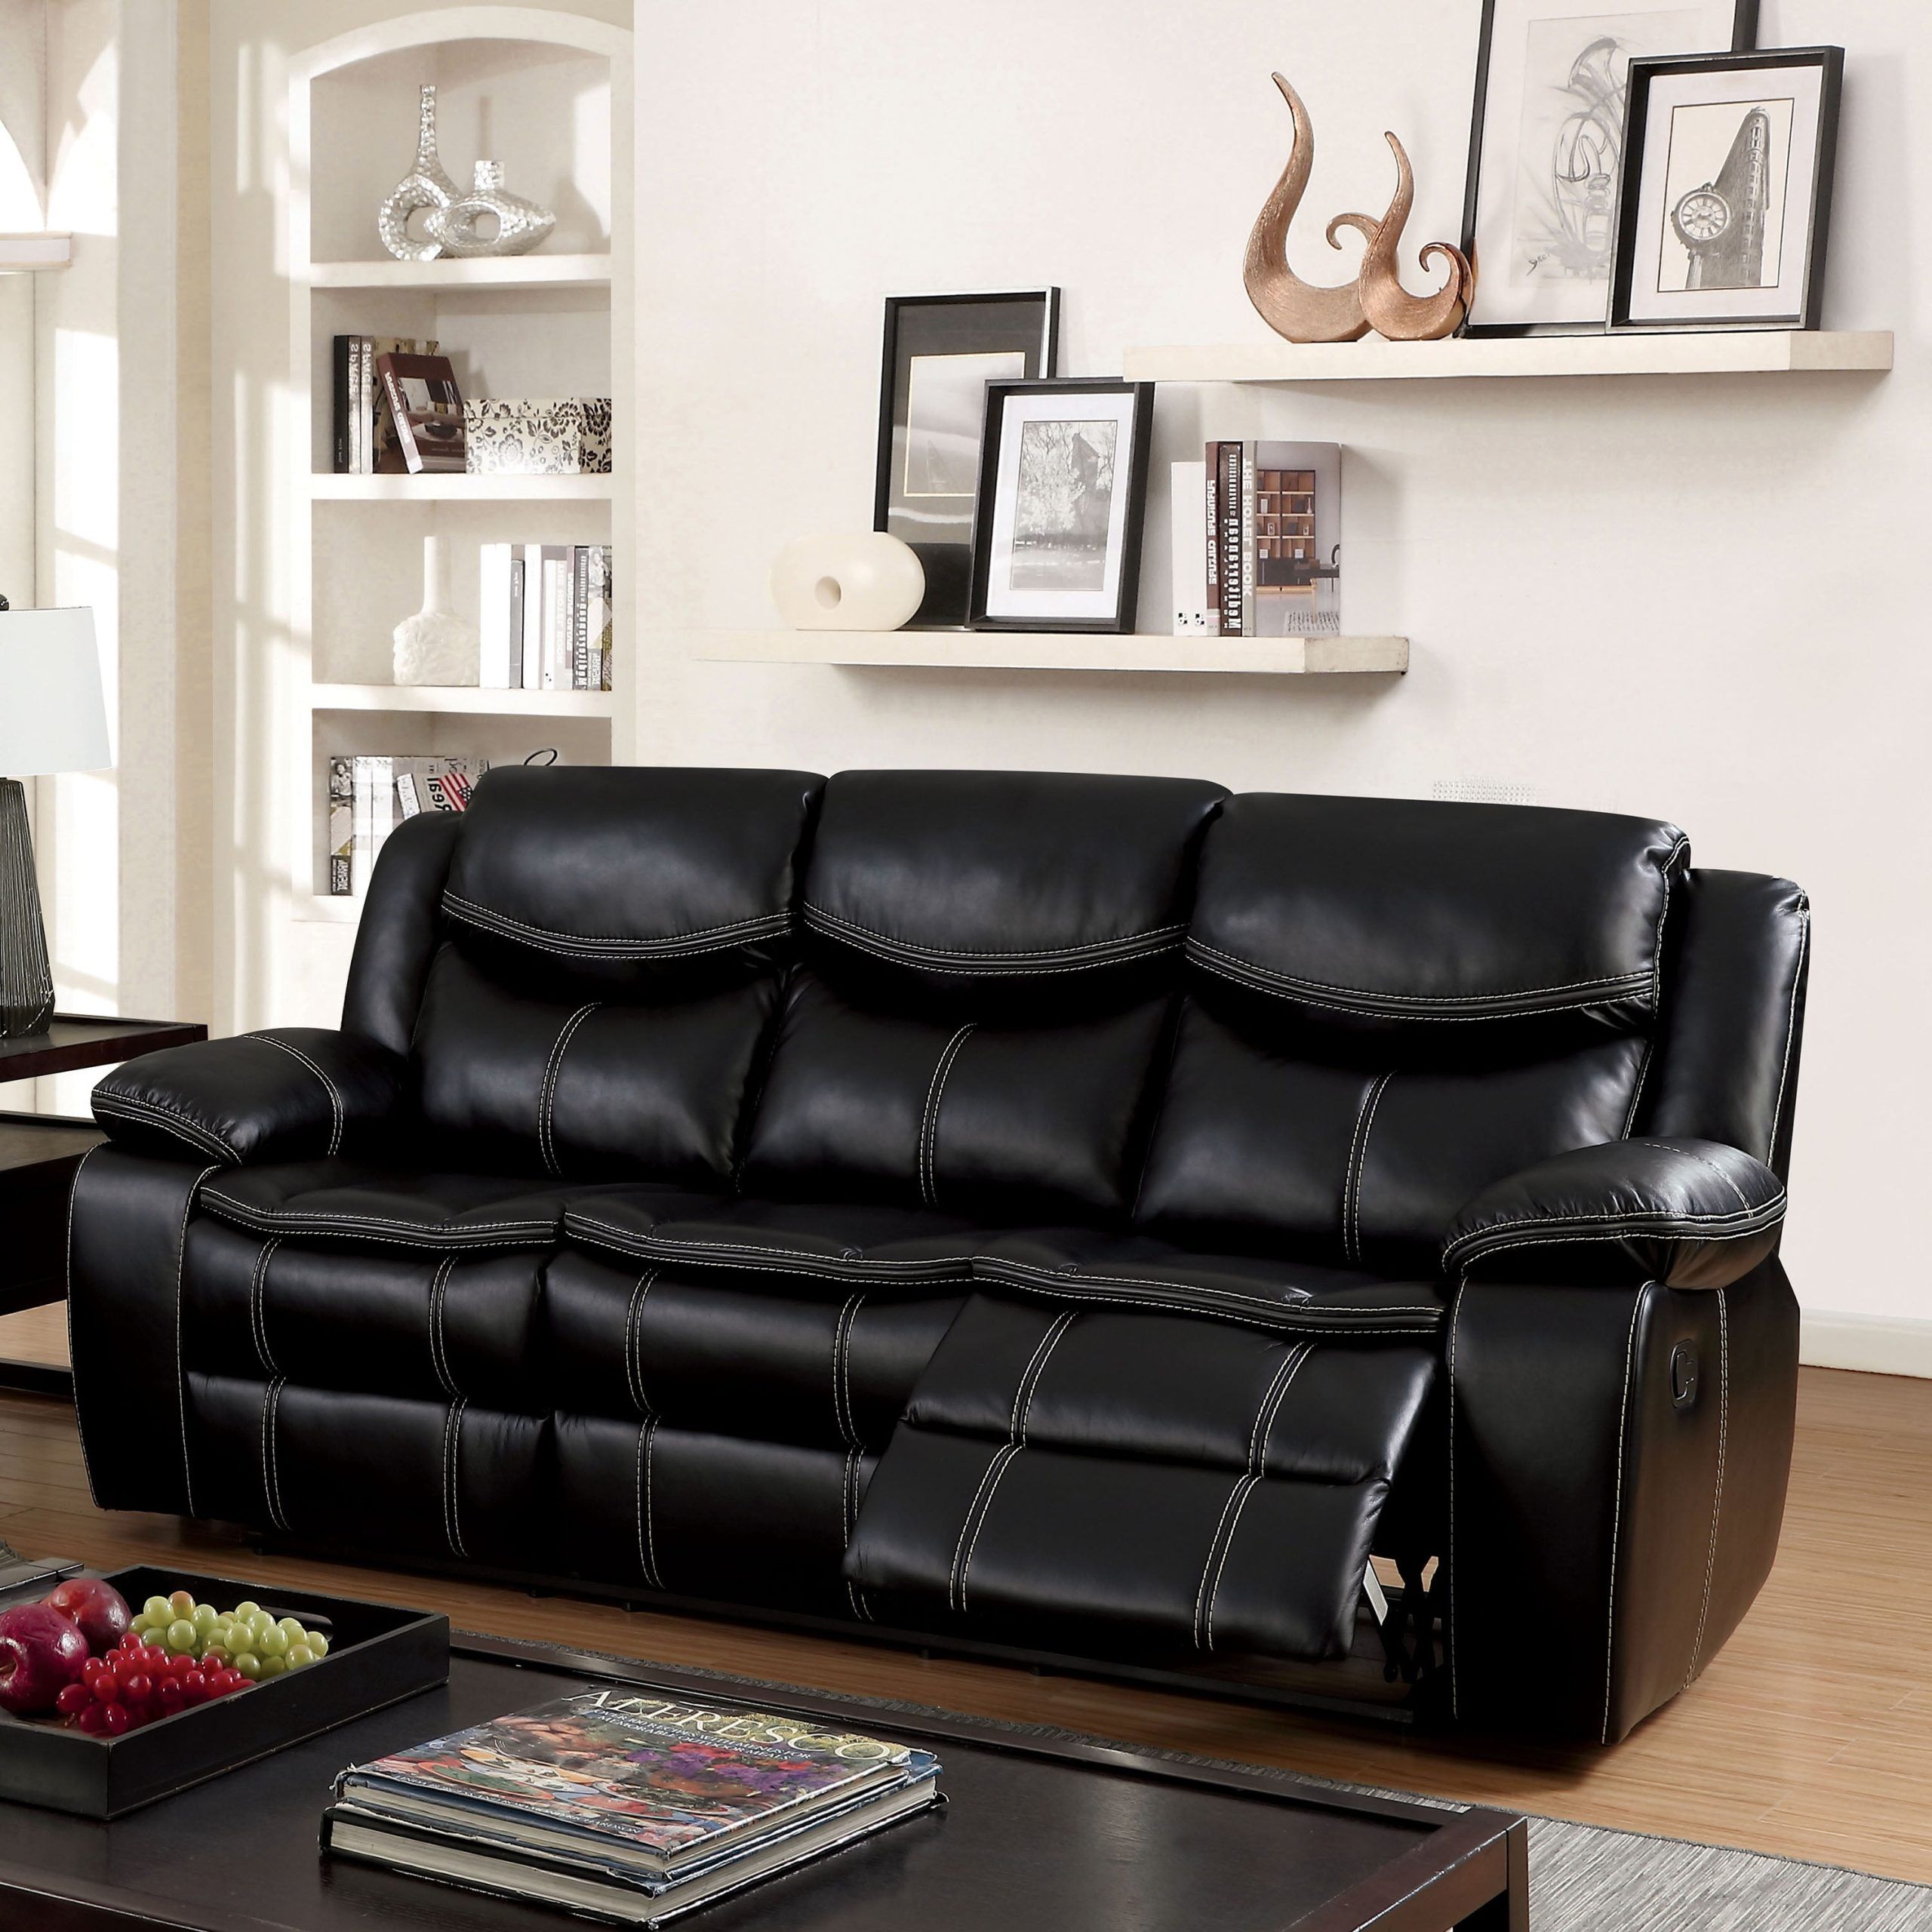 Furniture Of America Transitional Faux Leather Judson Reclining Sofa In Faux Leather Sofas (View 14 of 21)